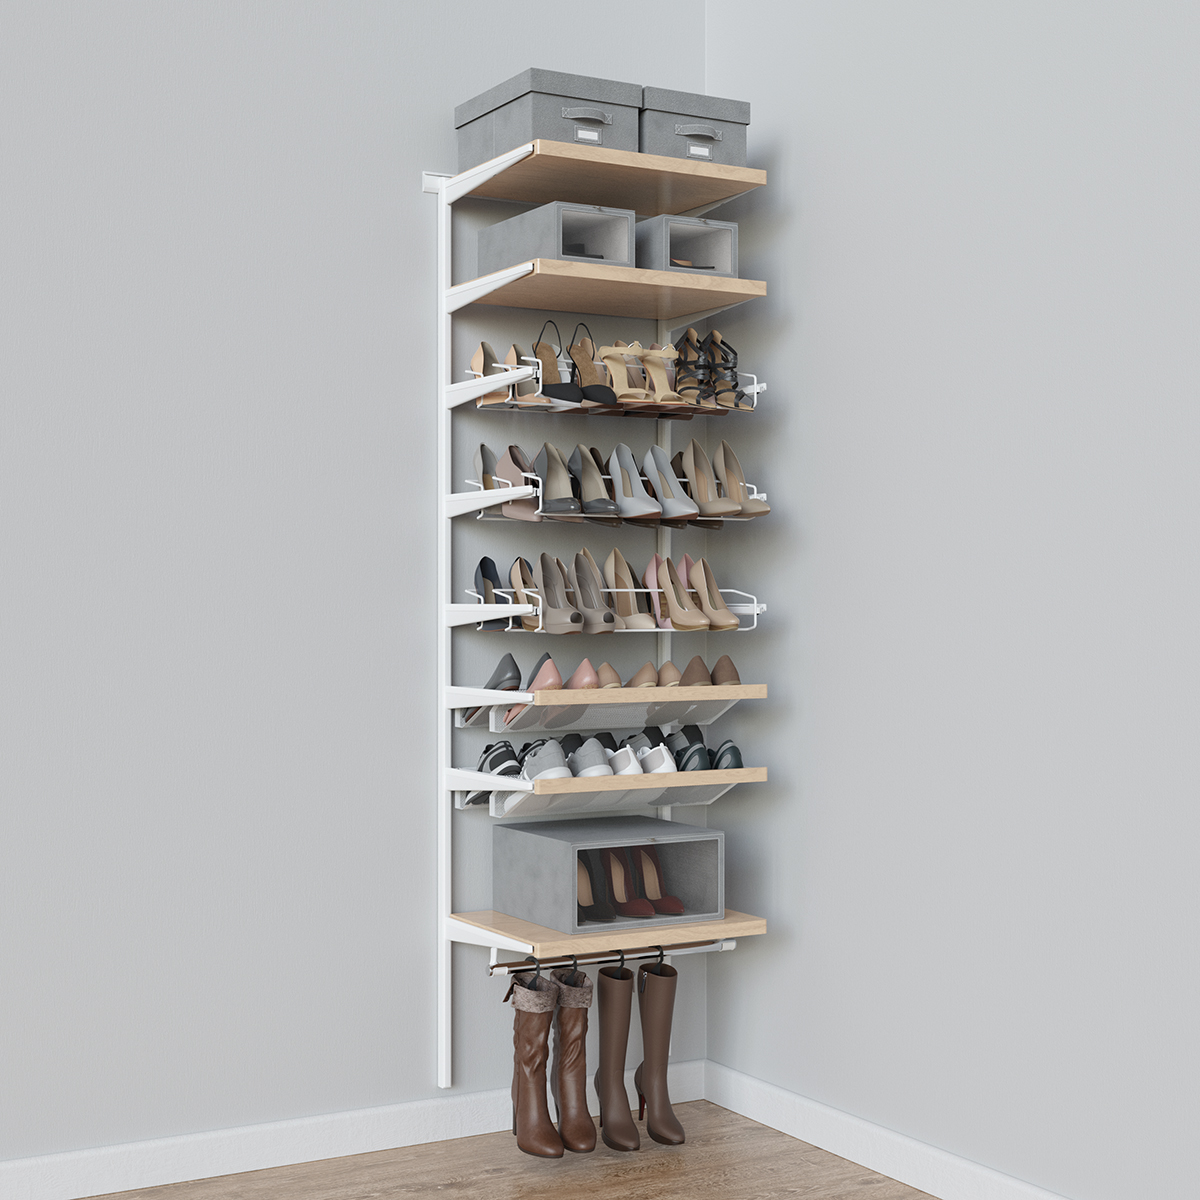 Elfa Decor 2-Foot Shoe Wall | The Container Store